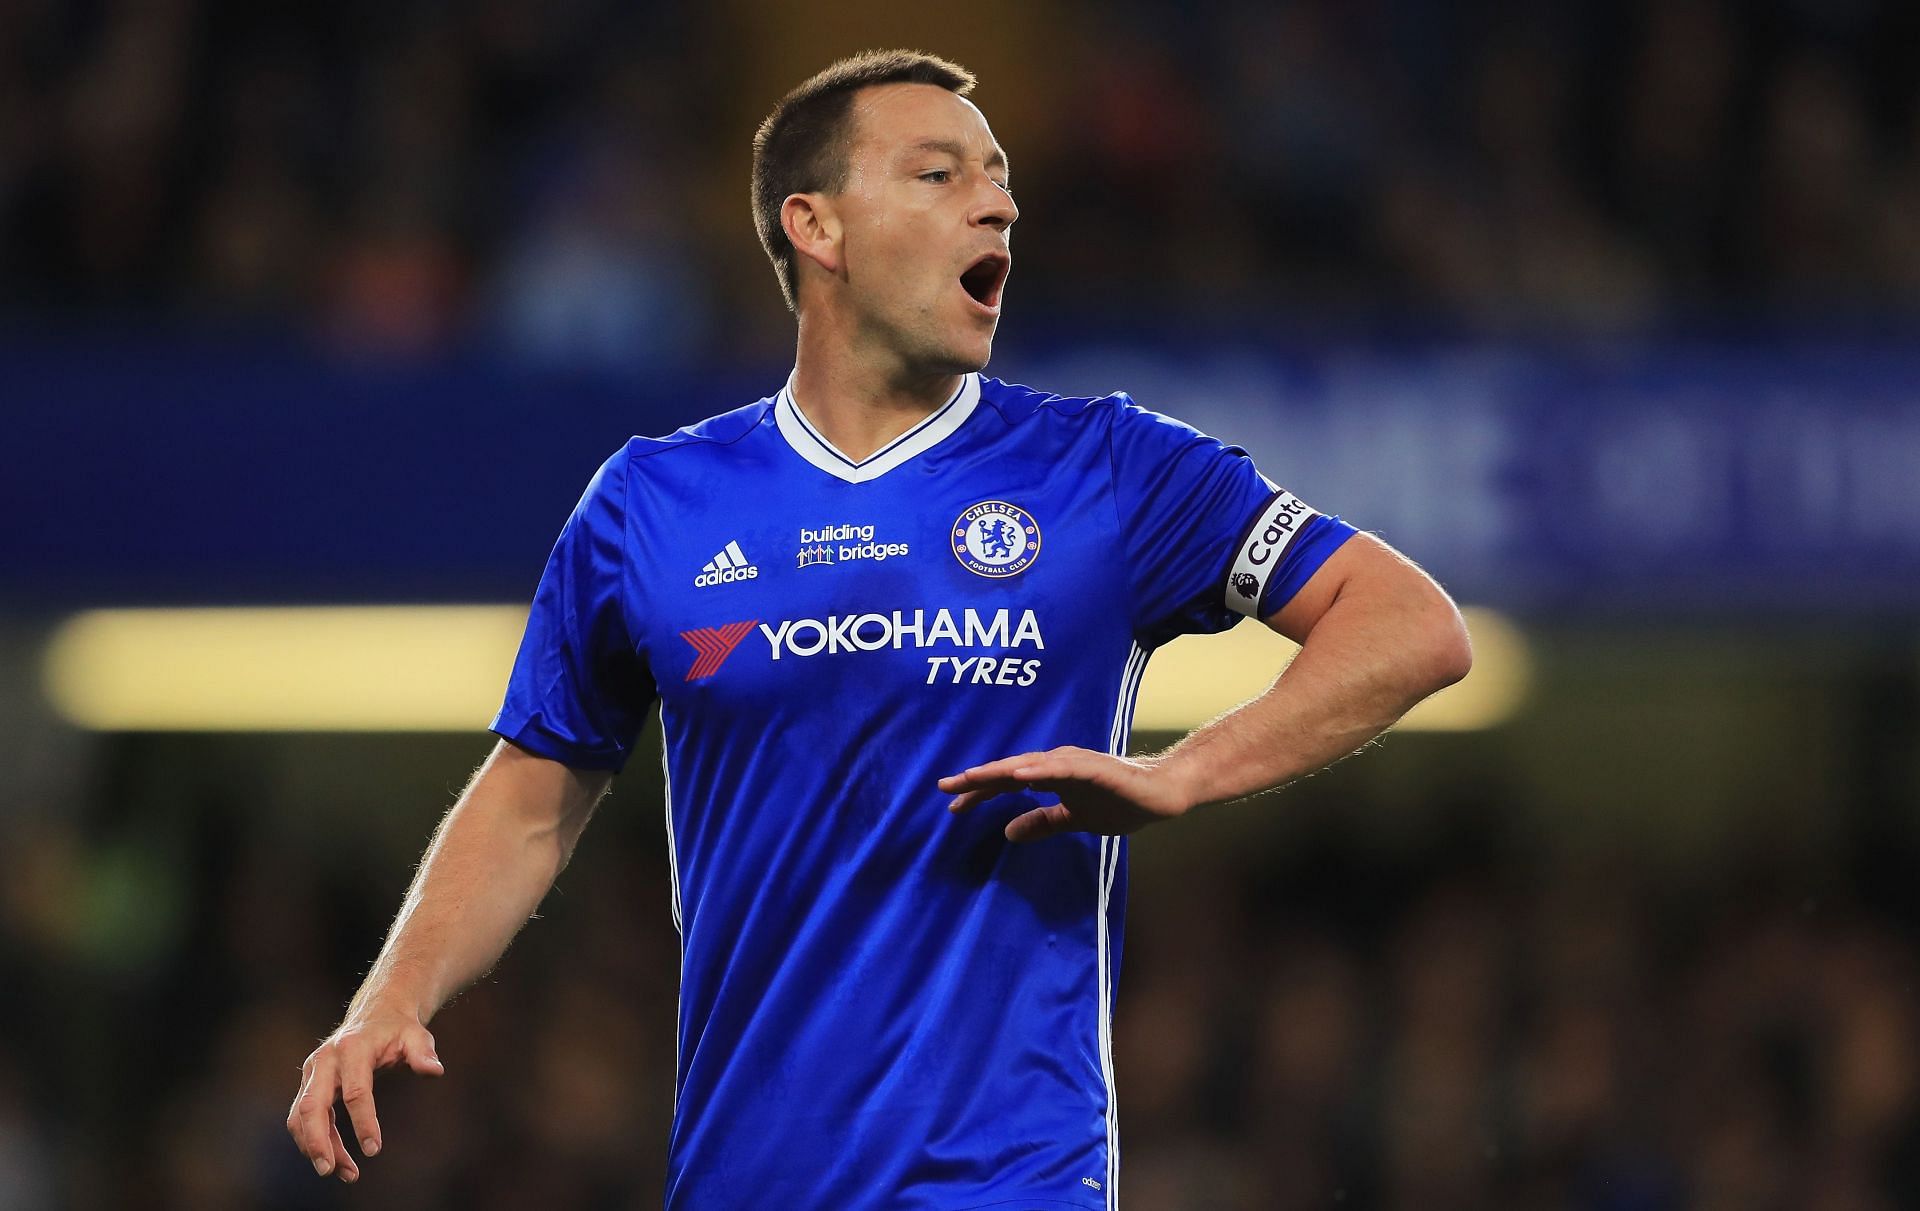 John Terry is the most successful captain in the history of the Premier League